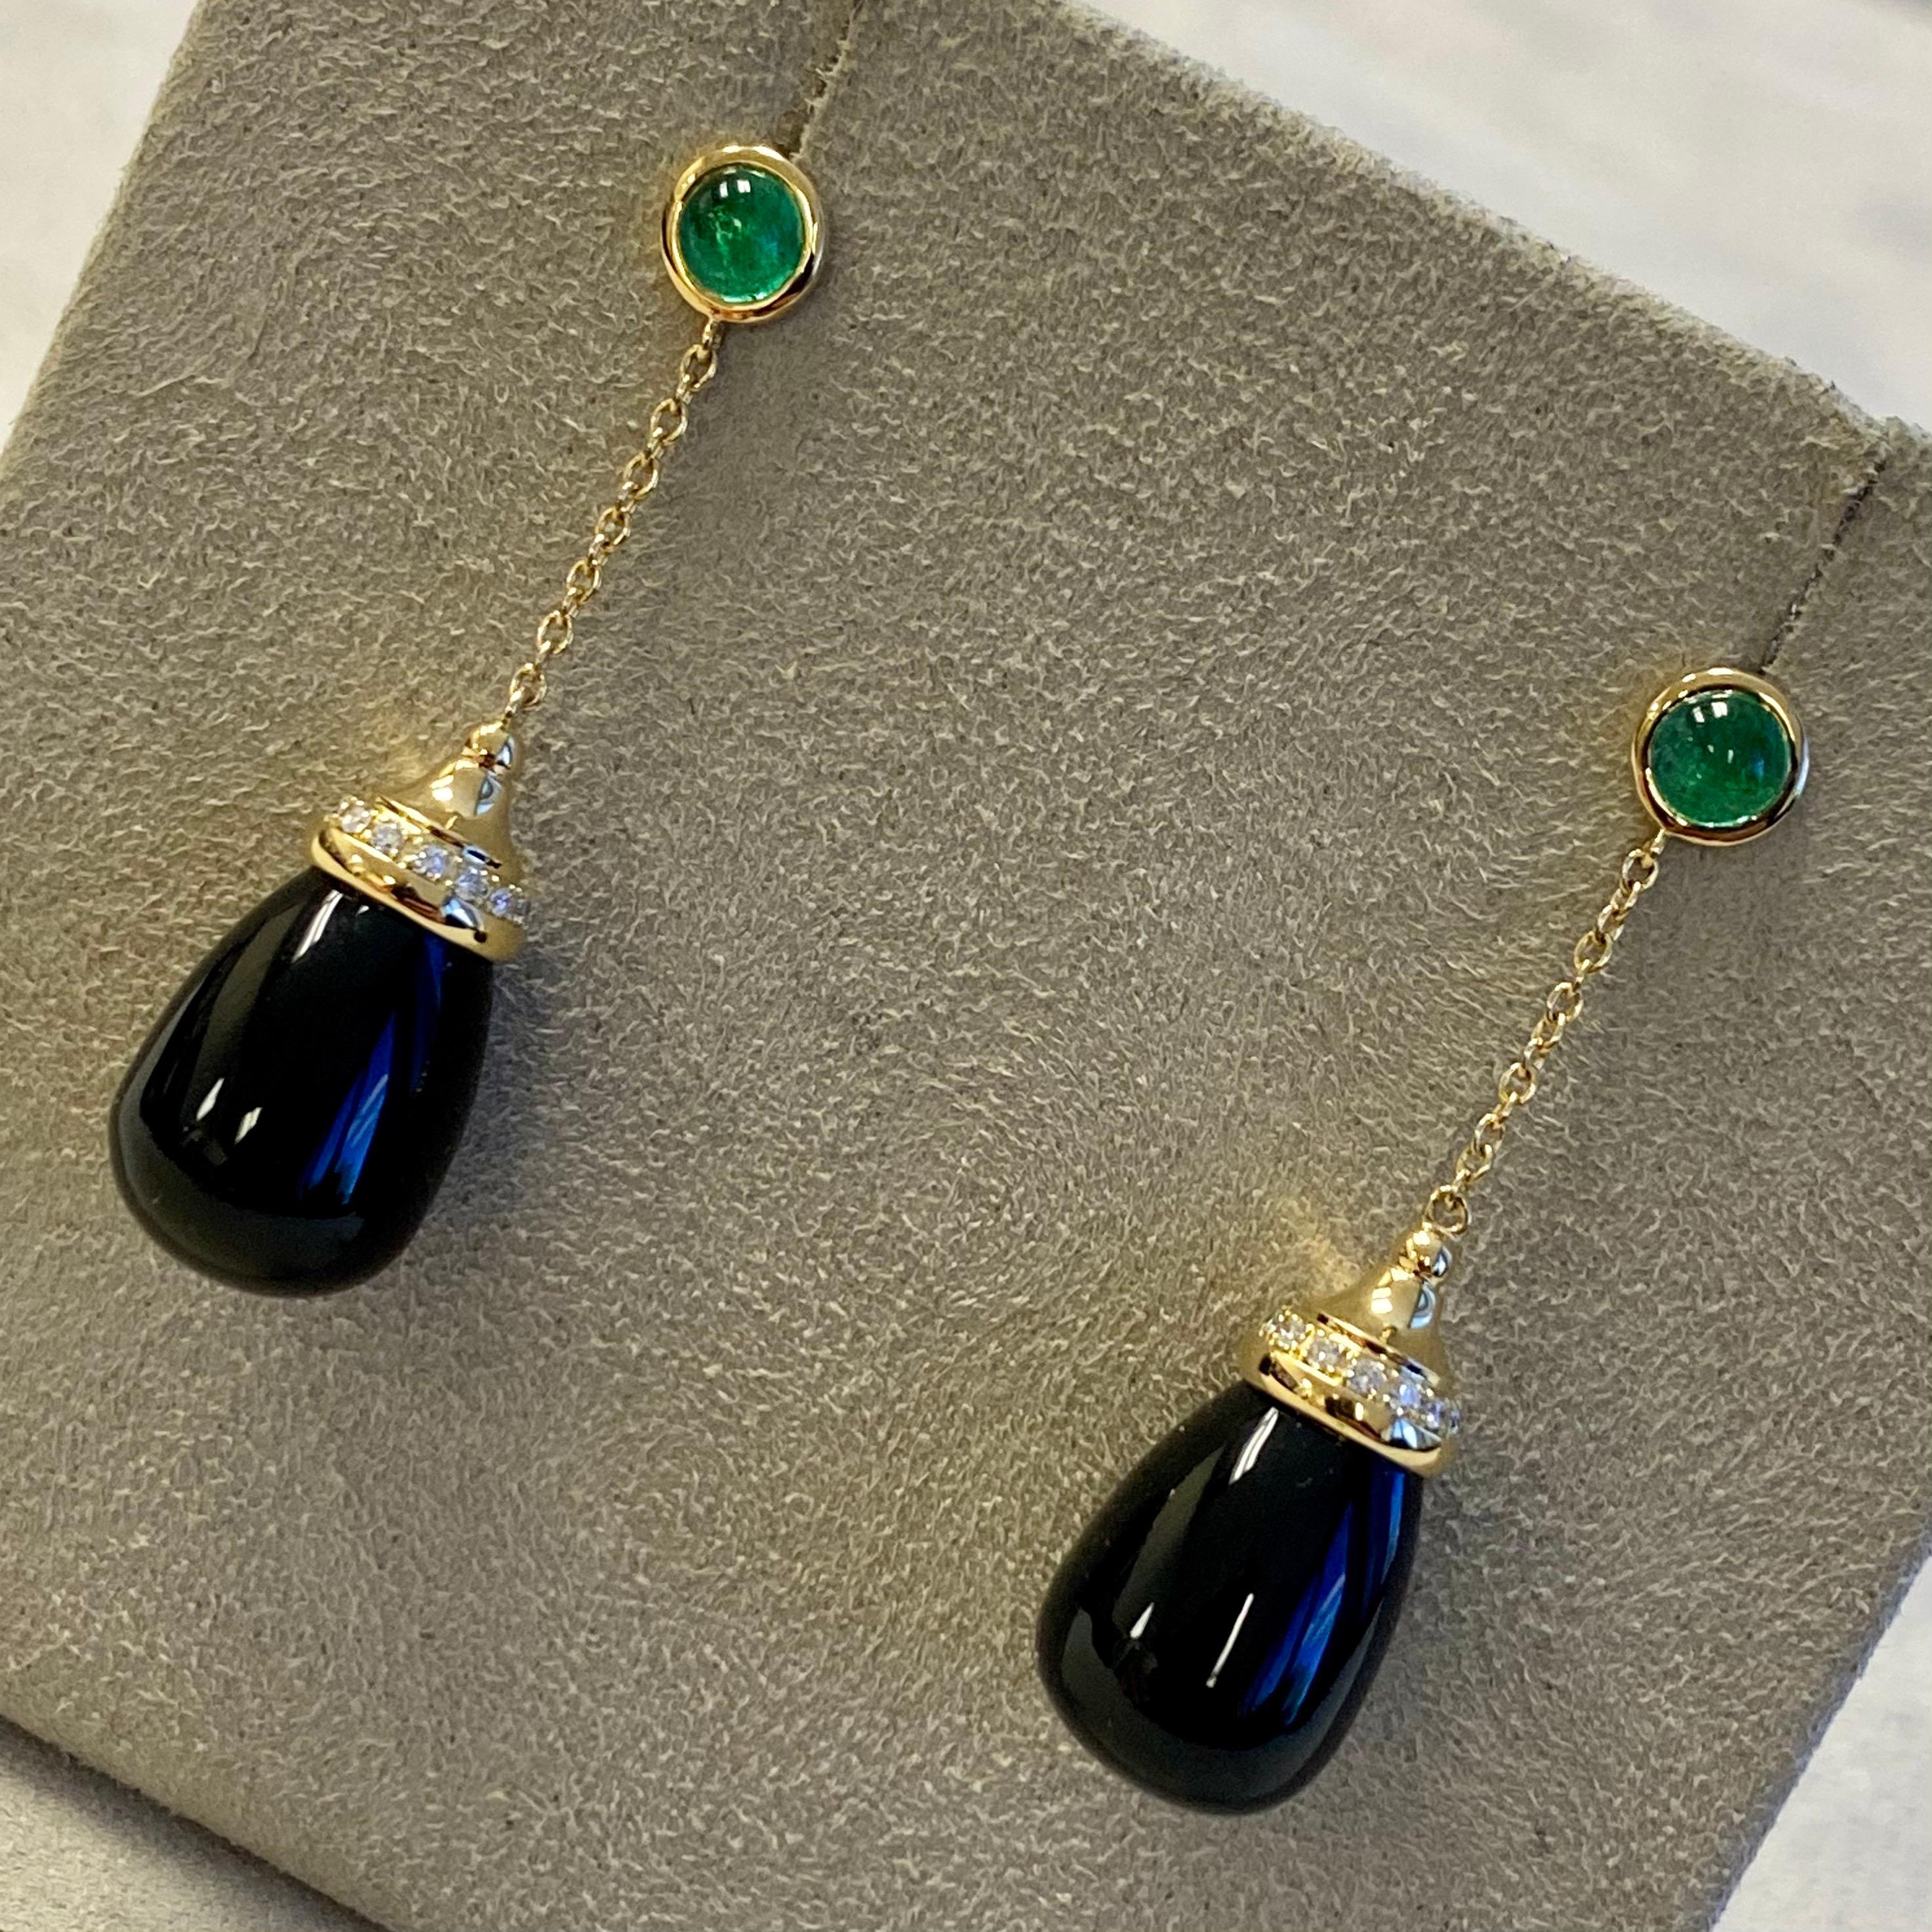 Created in 18 karat yellow gold
Black Onyx Drops 20 carats approx.
Emerald cabochons 0.50 carat approx.
Diamonds 0.10 carat approx.
18kyg butterfly backs

Exquisitely crafted in 18 karat yellow gold, these earrings boast Black Onyx Drops of